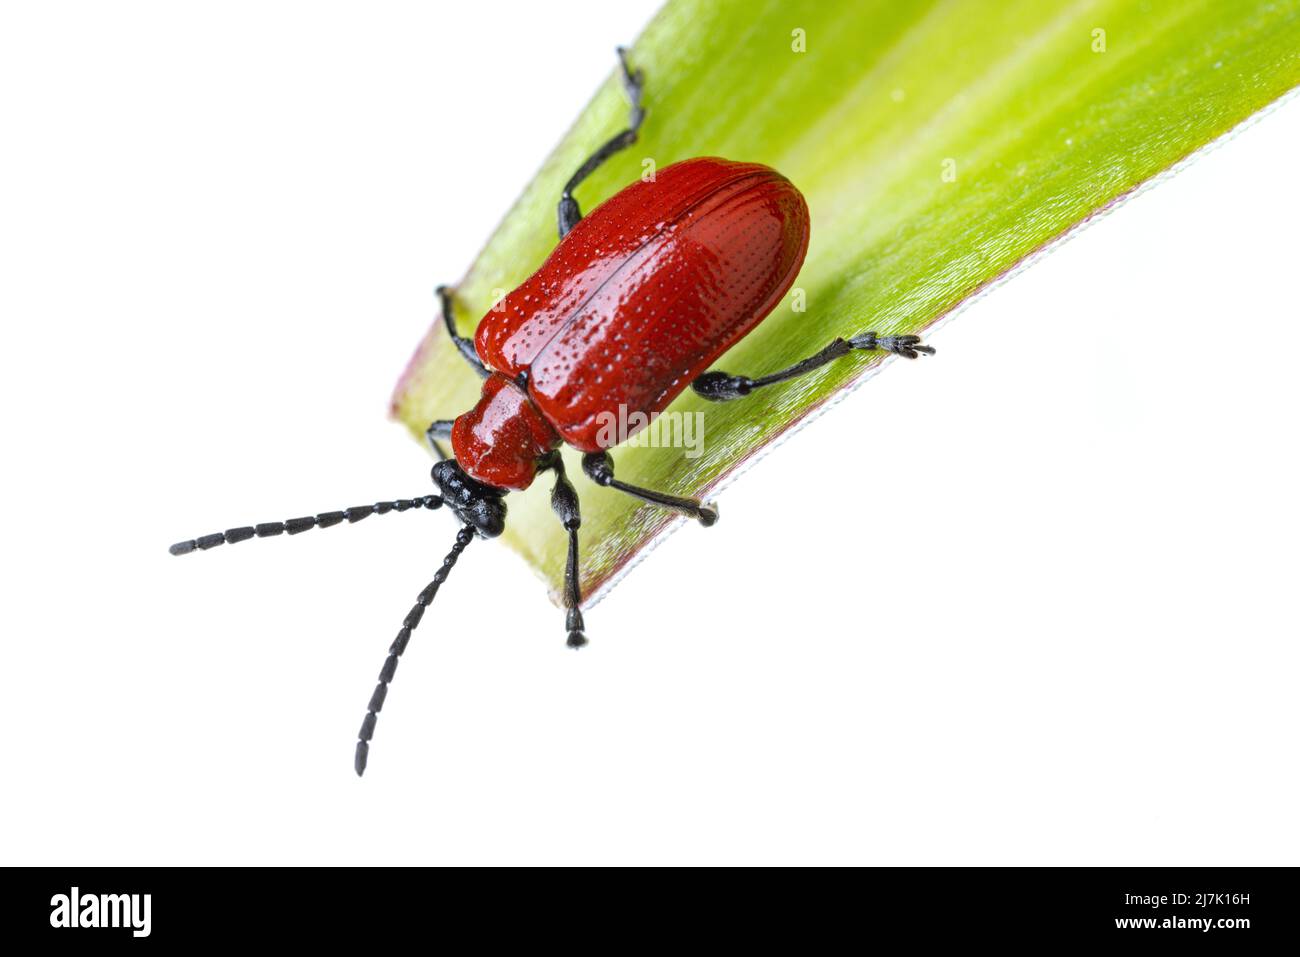 insects of europe - beetles: top view of scarlet lily beetle ( Lilioceris lili german Lilienhaehnchen) on a lily leaf  isolated on white background Stock Photo